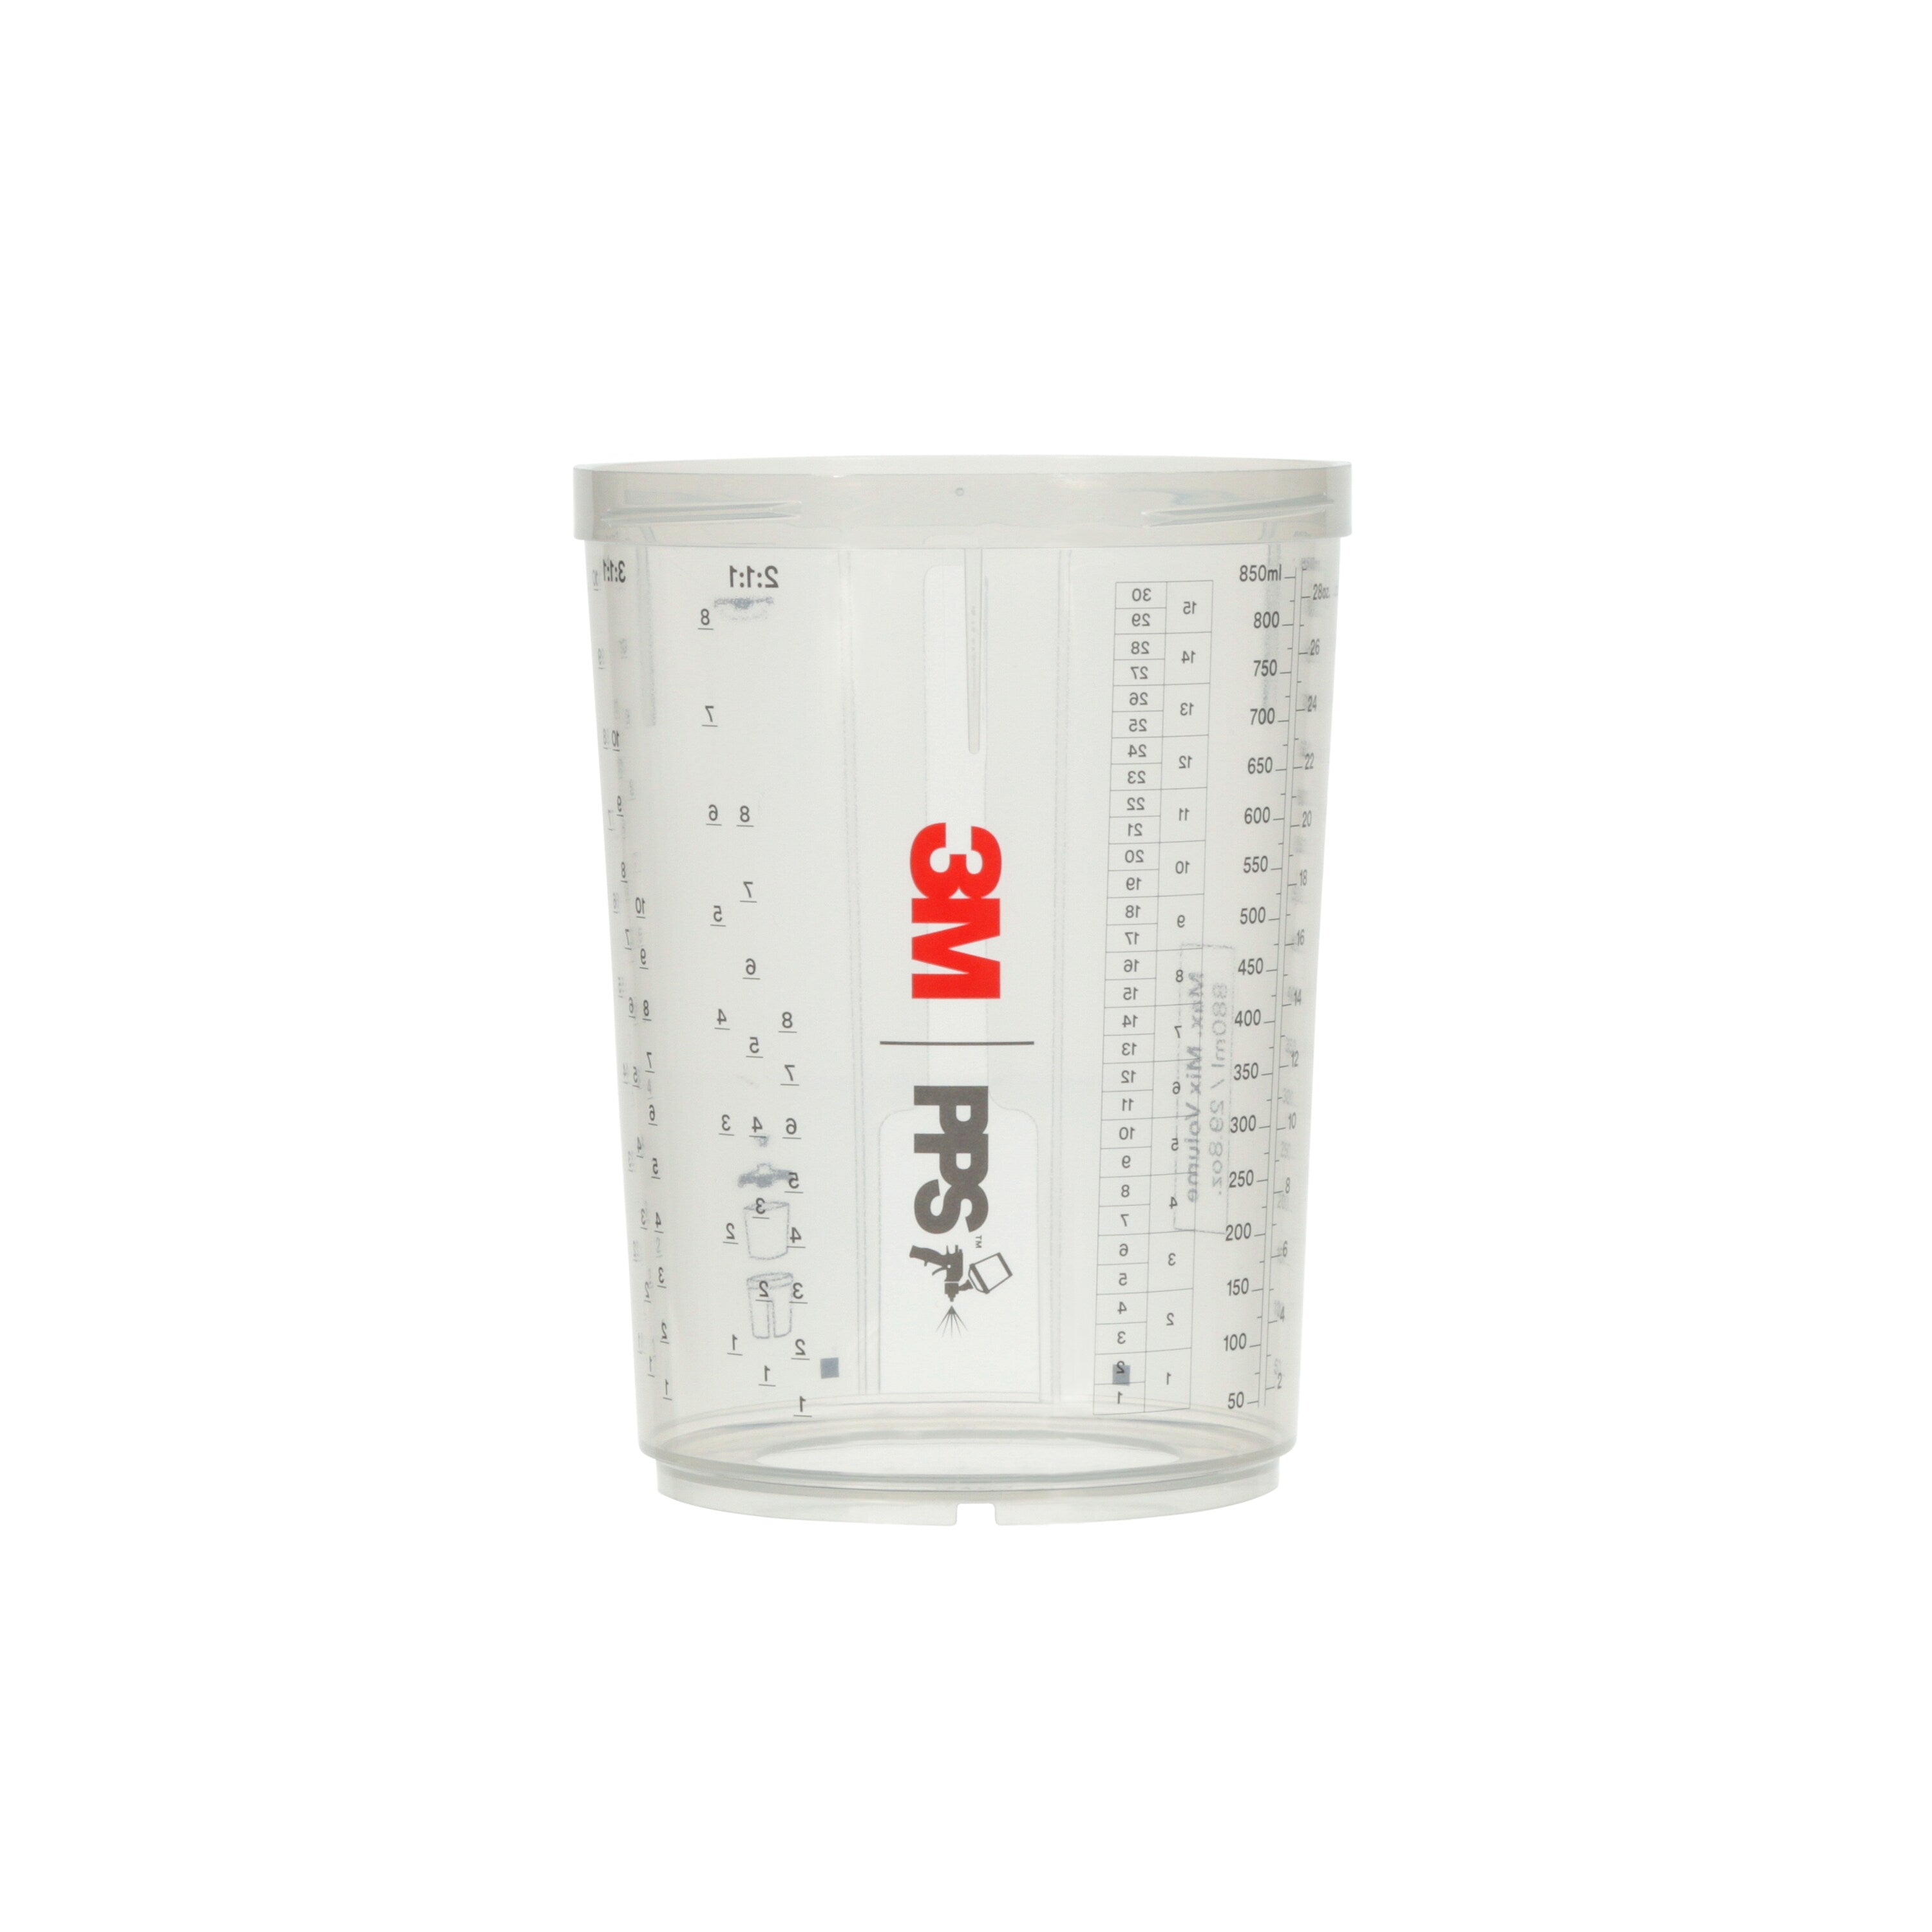 3M™ PPS™ Series 2.0 Cup 26023, Large 28 fl oz, 2 Cups